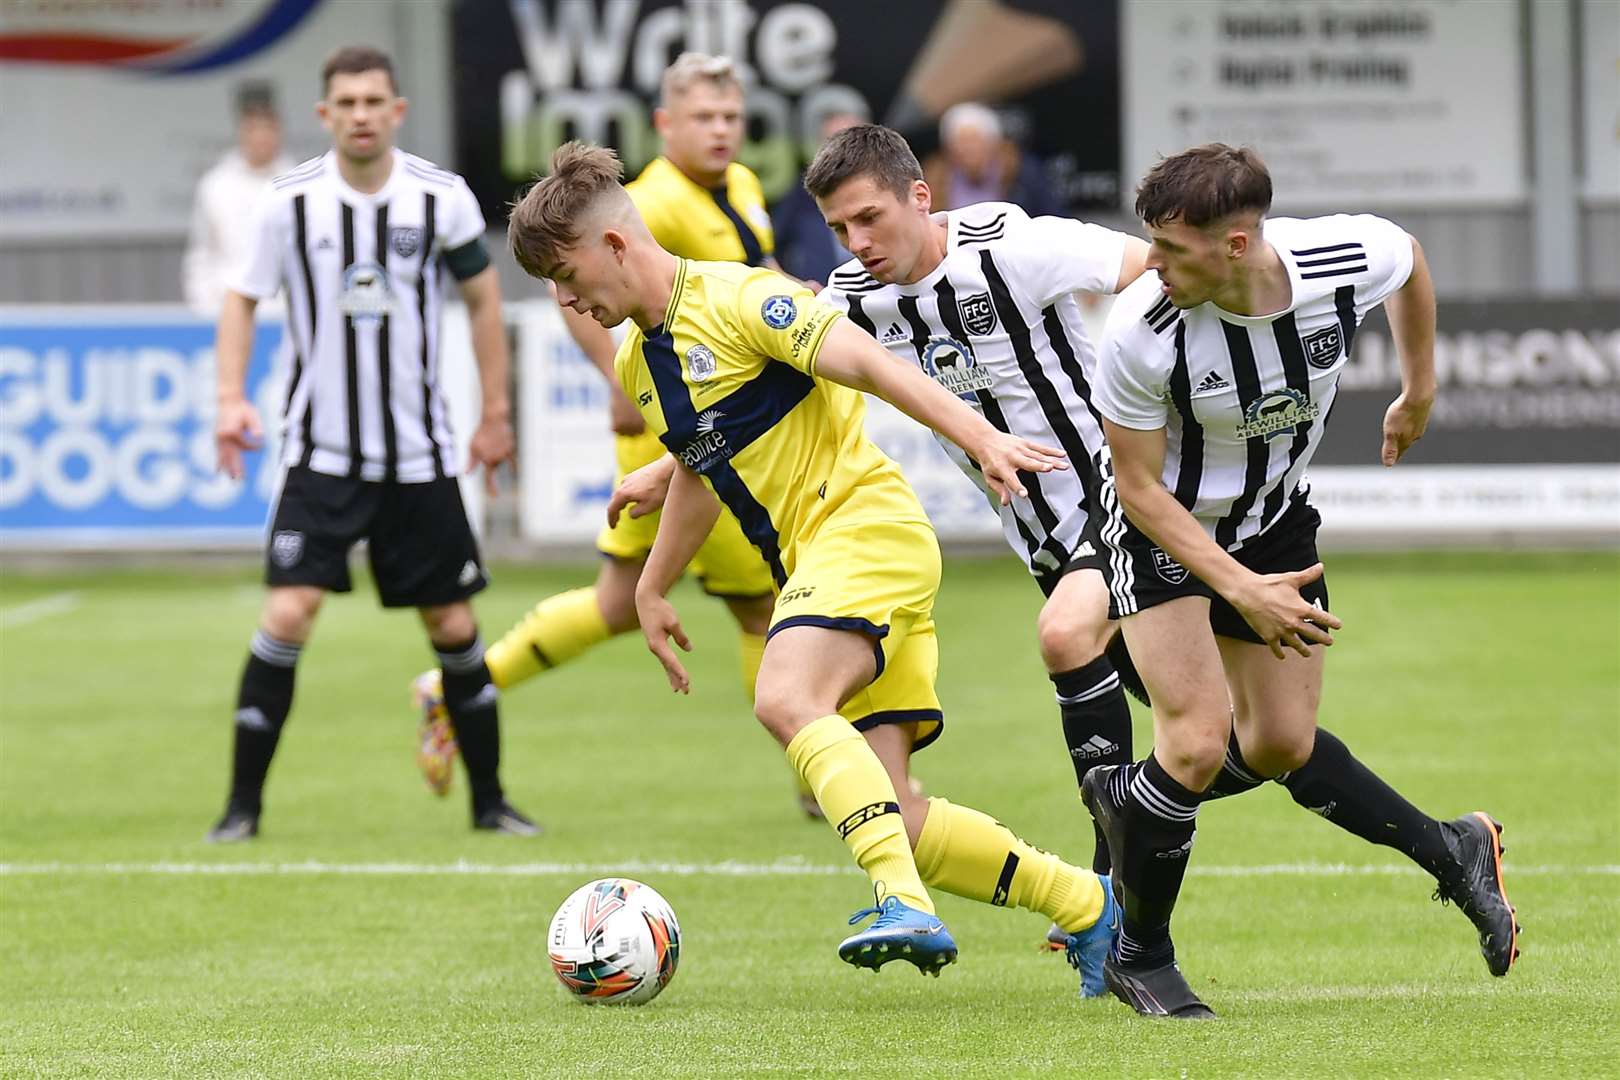 Wick's Harry Hennem drives through Fraserburgh's Ryan Sargent and Paul Young during Saturday's match at Bellslea Park. Picture: Mel Roger